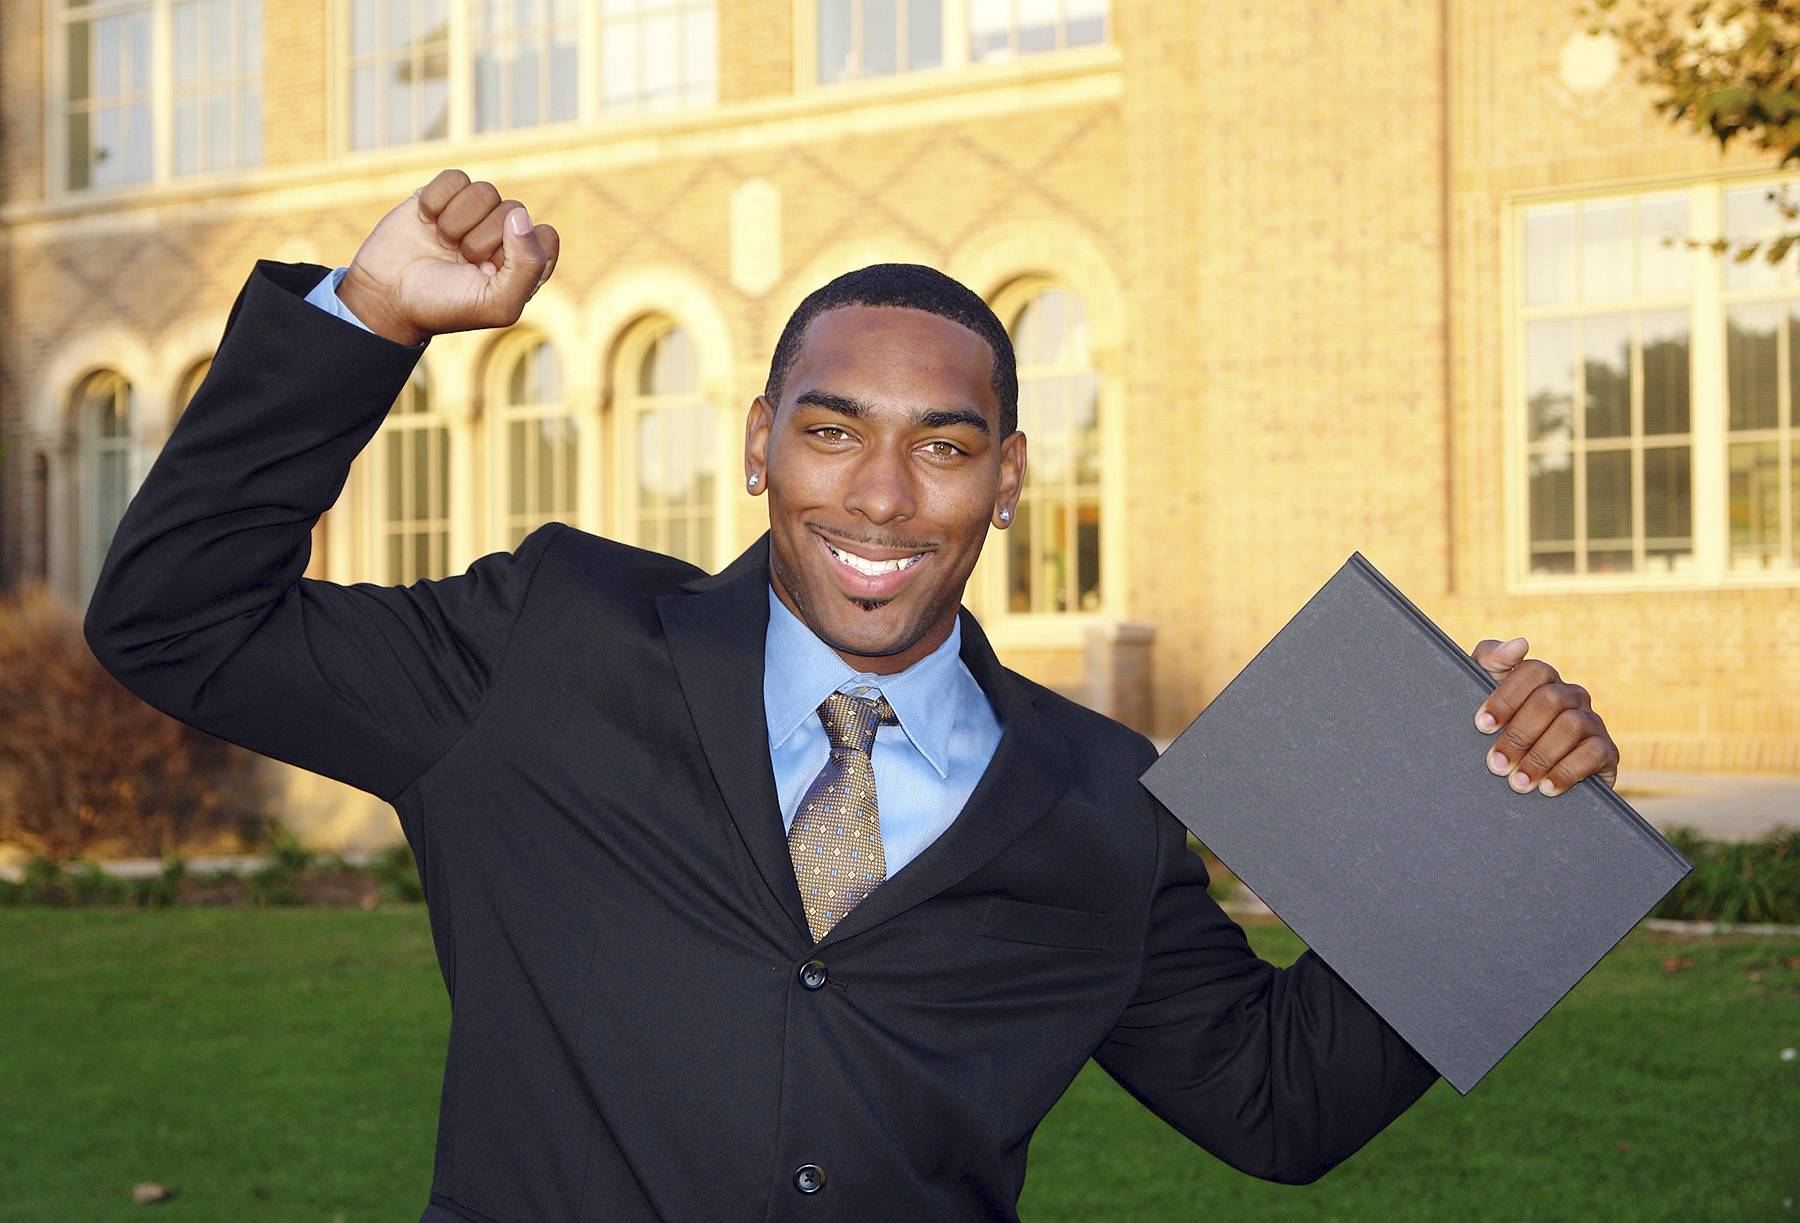 On the Yard: A Look at the Biggest News From HBCUs in 2013